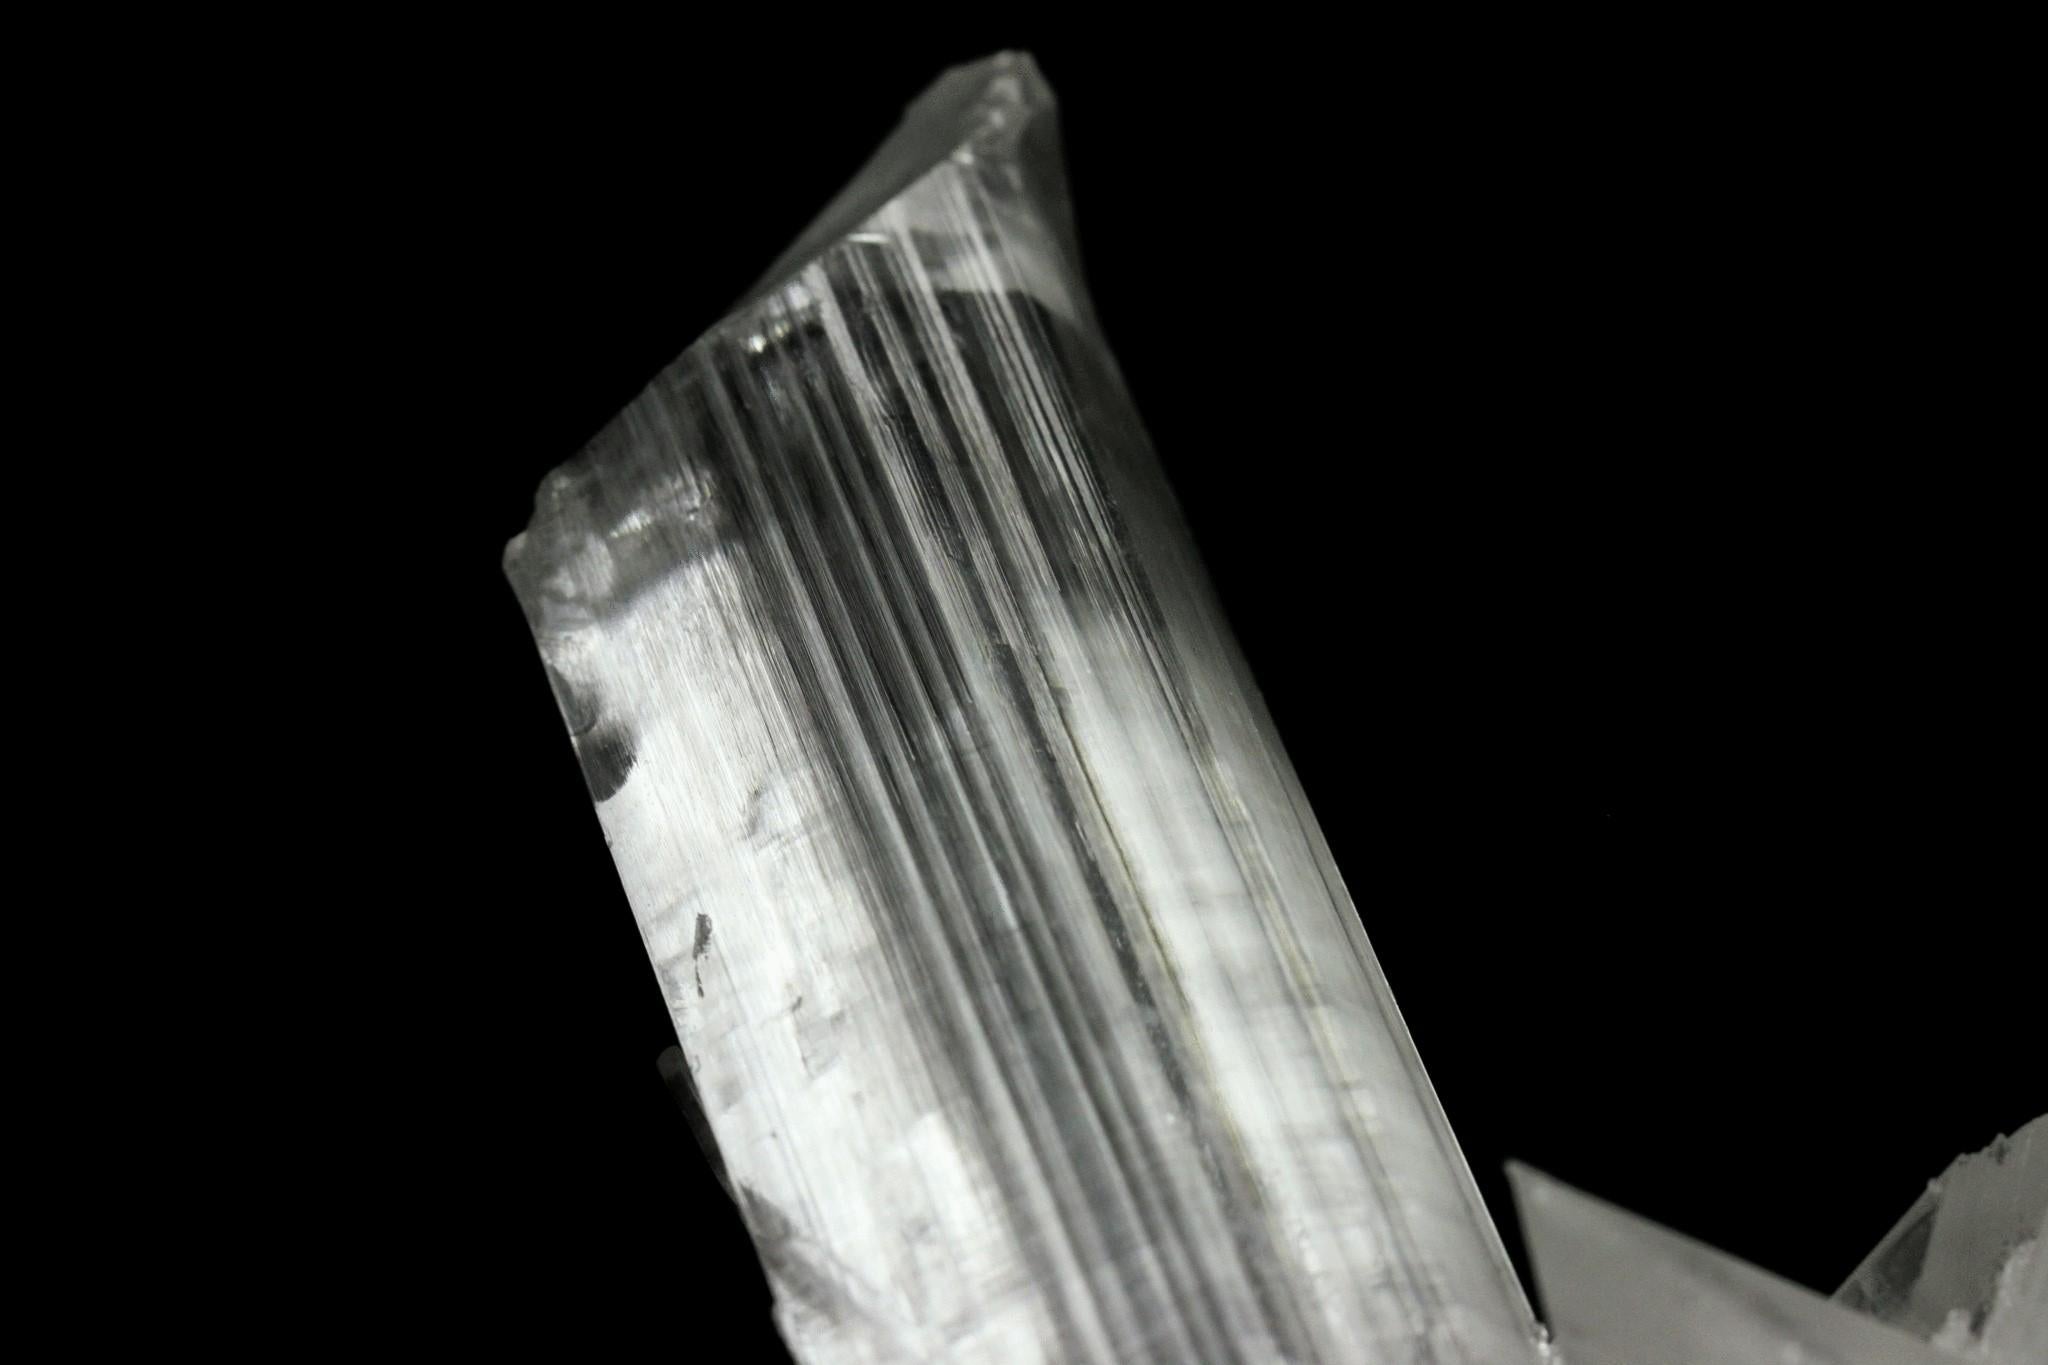 From Naica Mine, Naica, Mun. de Saucillo, Chihuahua, Mexico

Aesthetic specimen of a transparent 4'' selenite wand perched atop a luster of stark white gypsum selenite blades. The selenite crystal has great transparency, terminated with striated